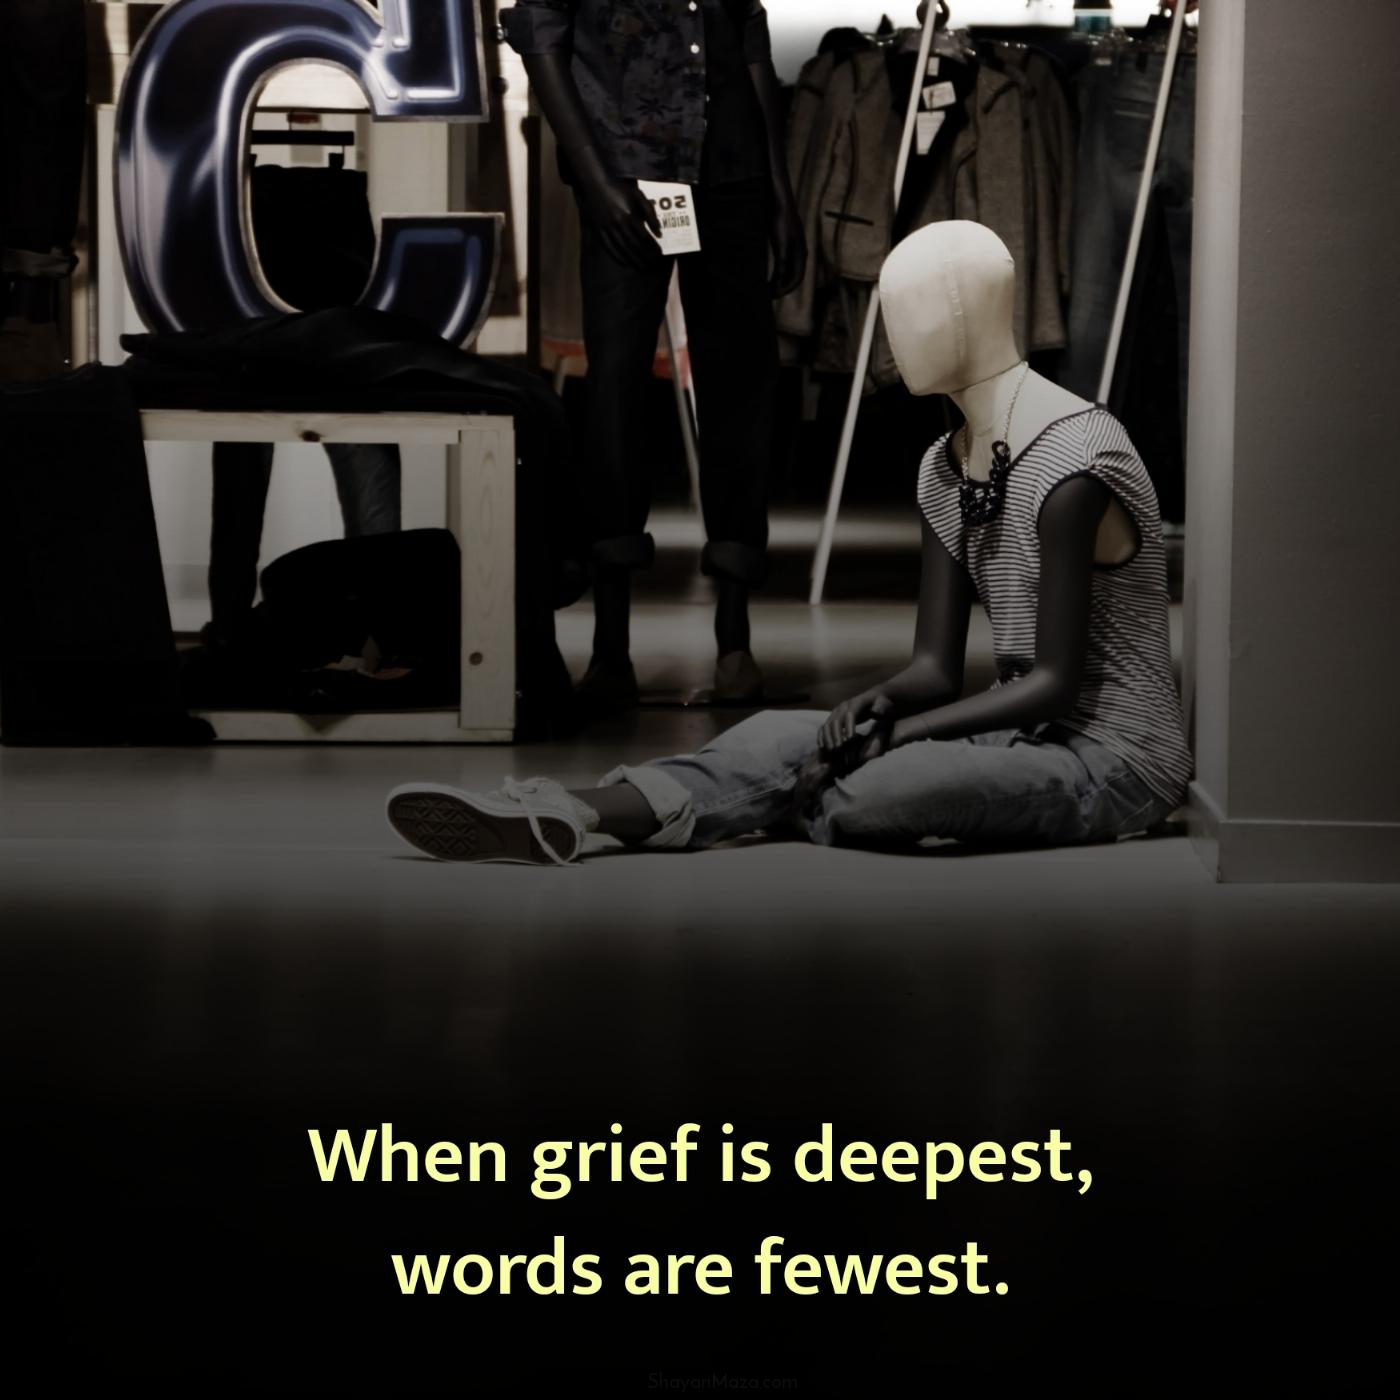 When grief is deepest words are fewest